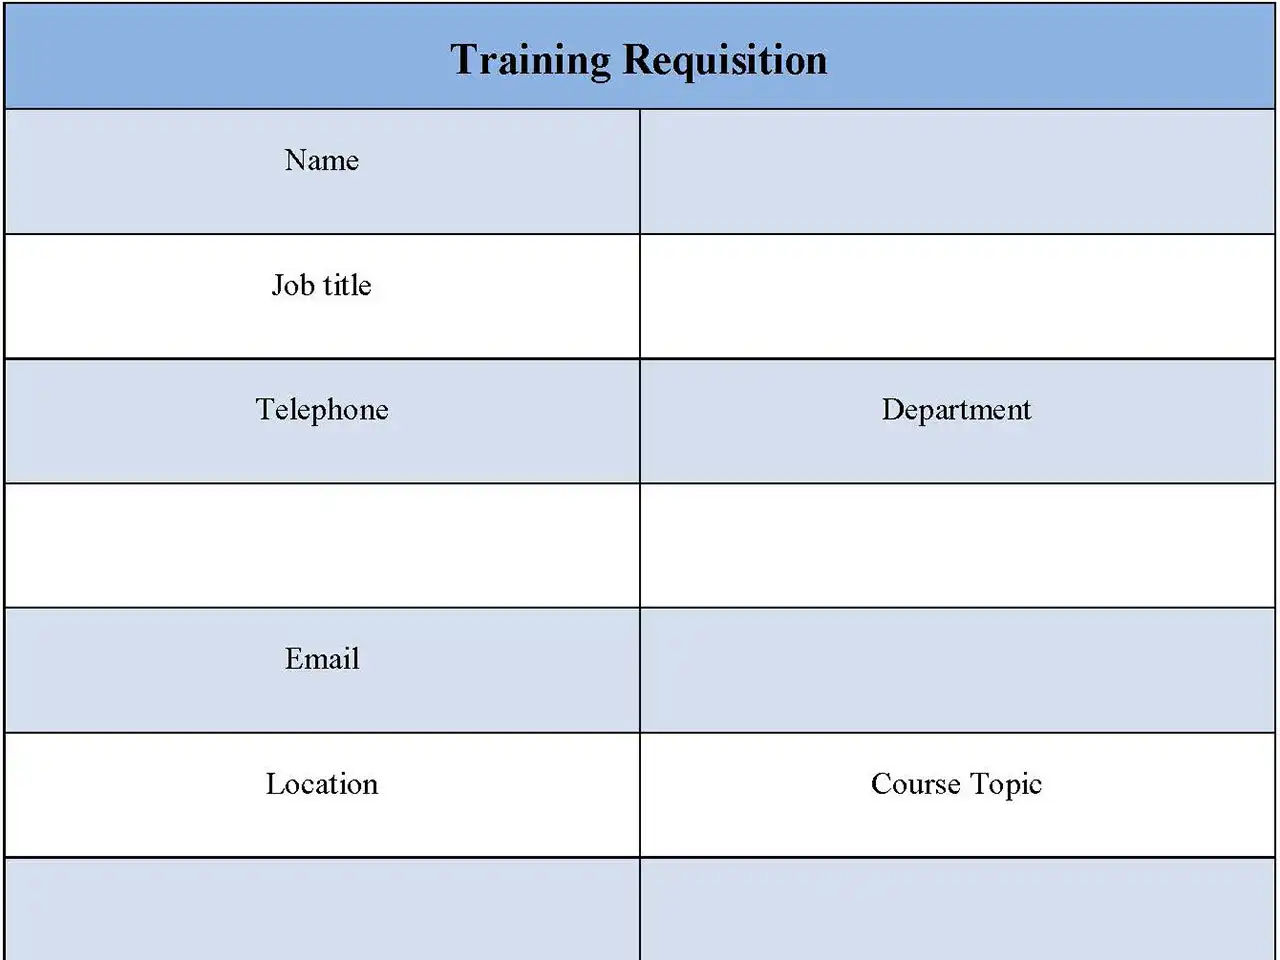 Training Requisition Form